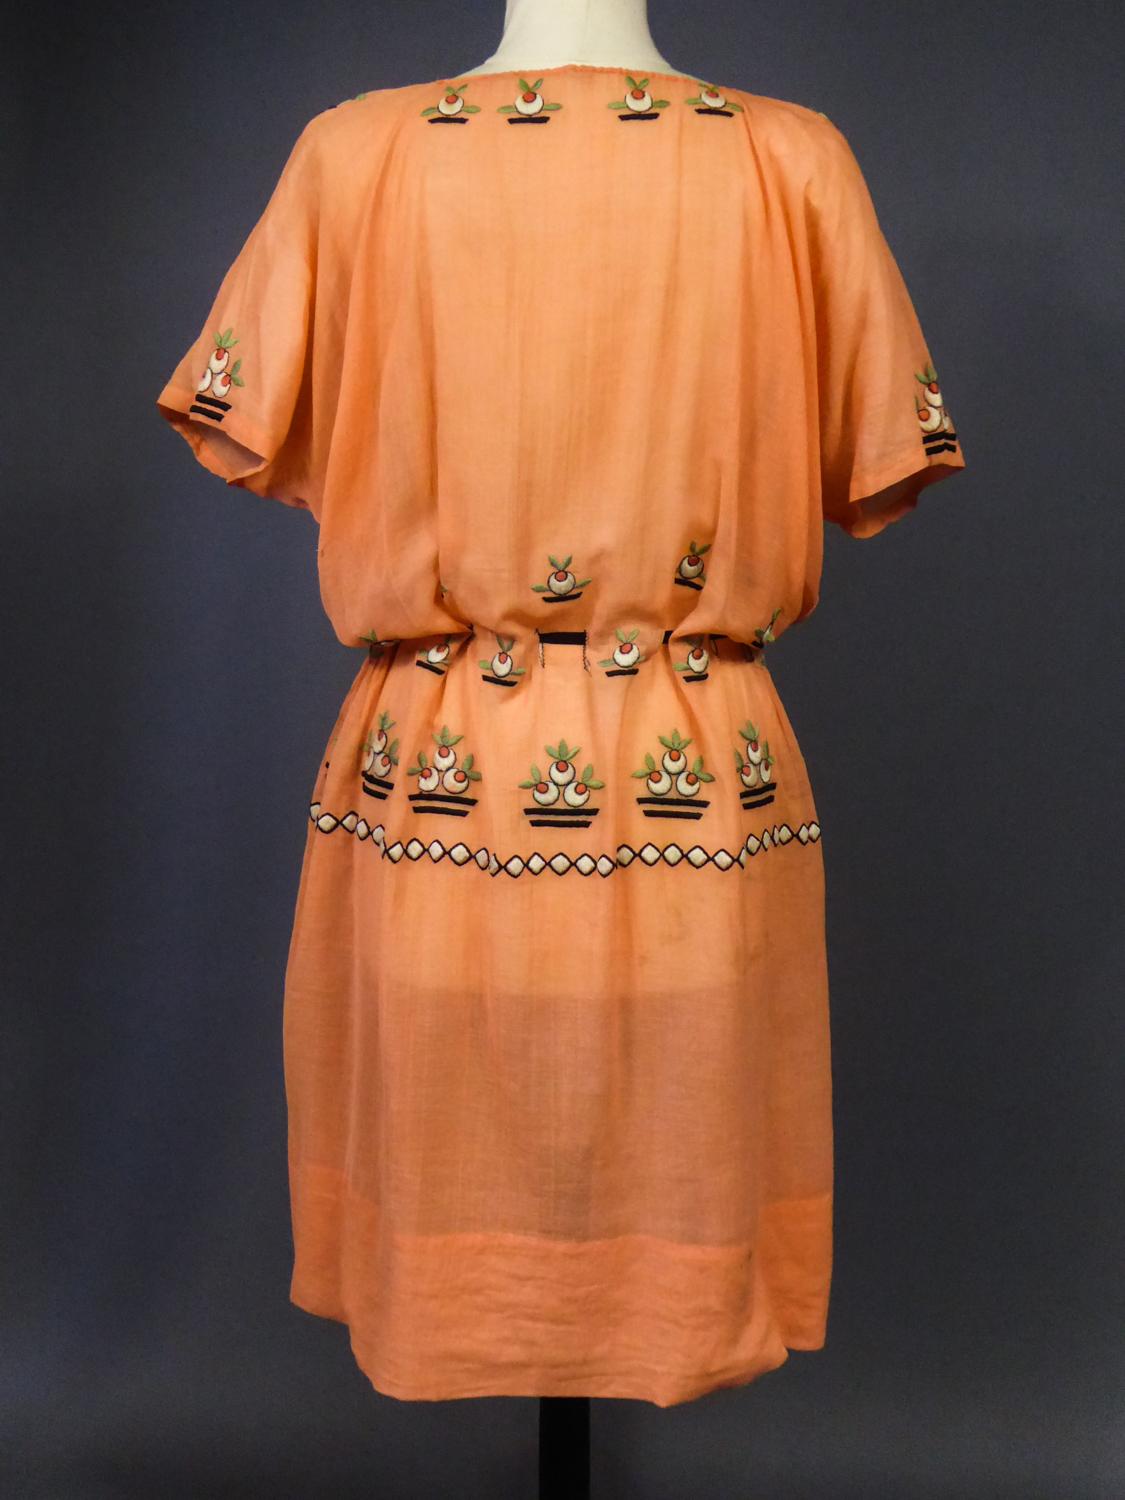 A Seaside Embroidered Cotton Dress in the style of Atelier Martine Circa 1920 For Sale 5